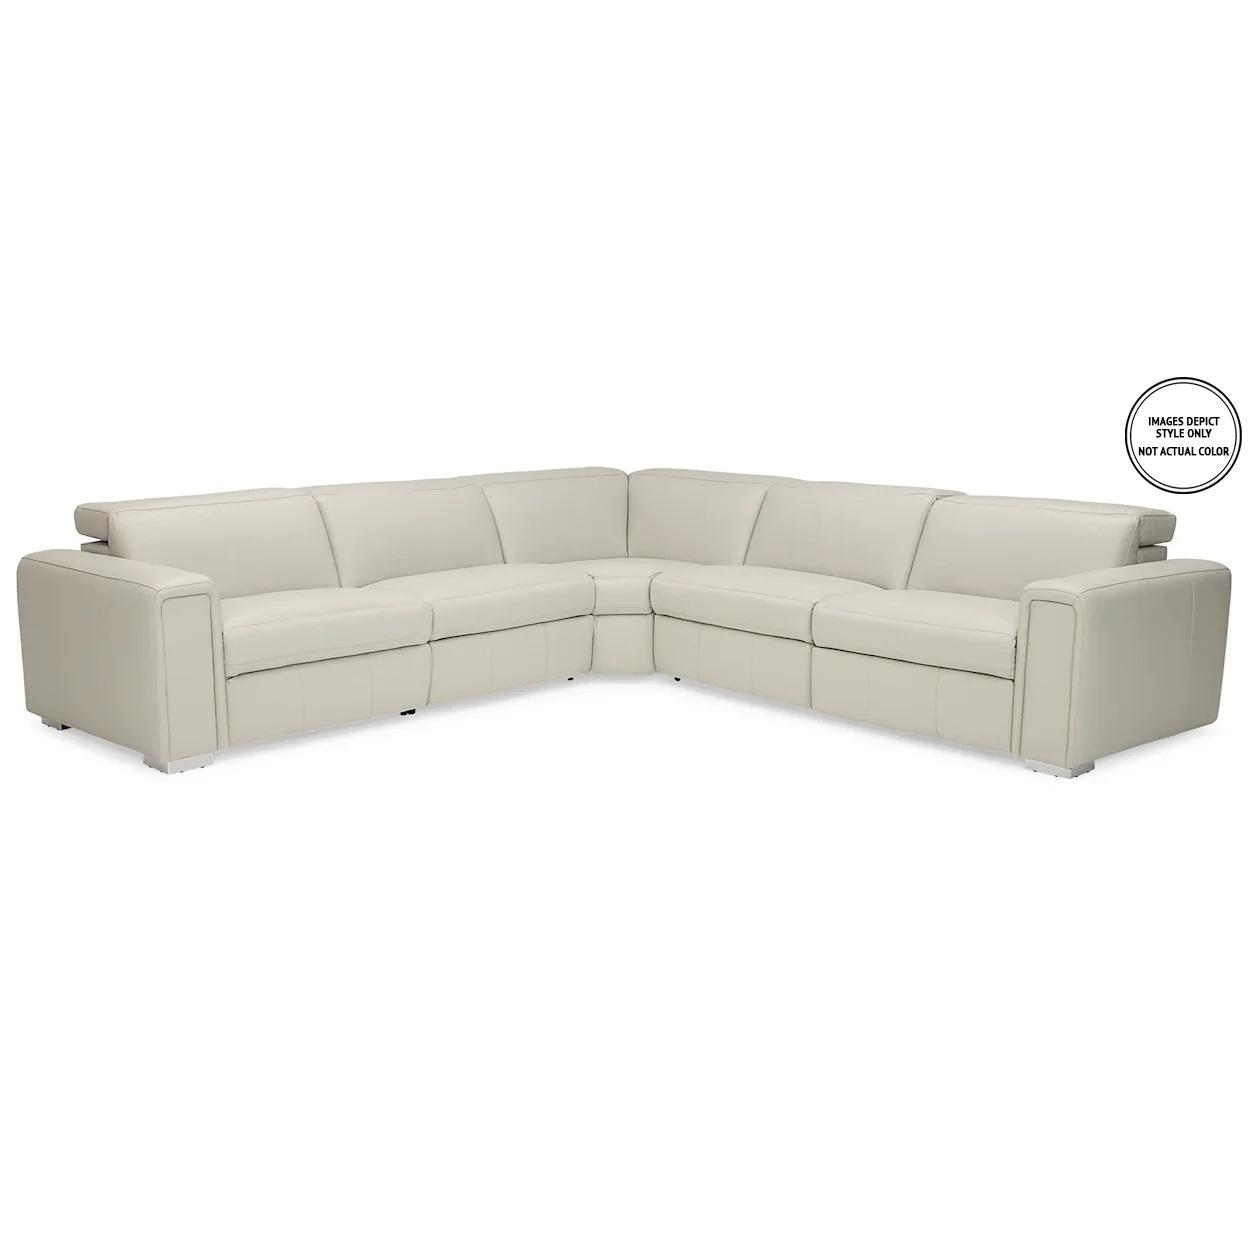 Altyn 5PC Power Motion Sectional,Image Depicts Style